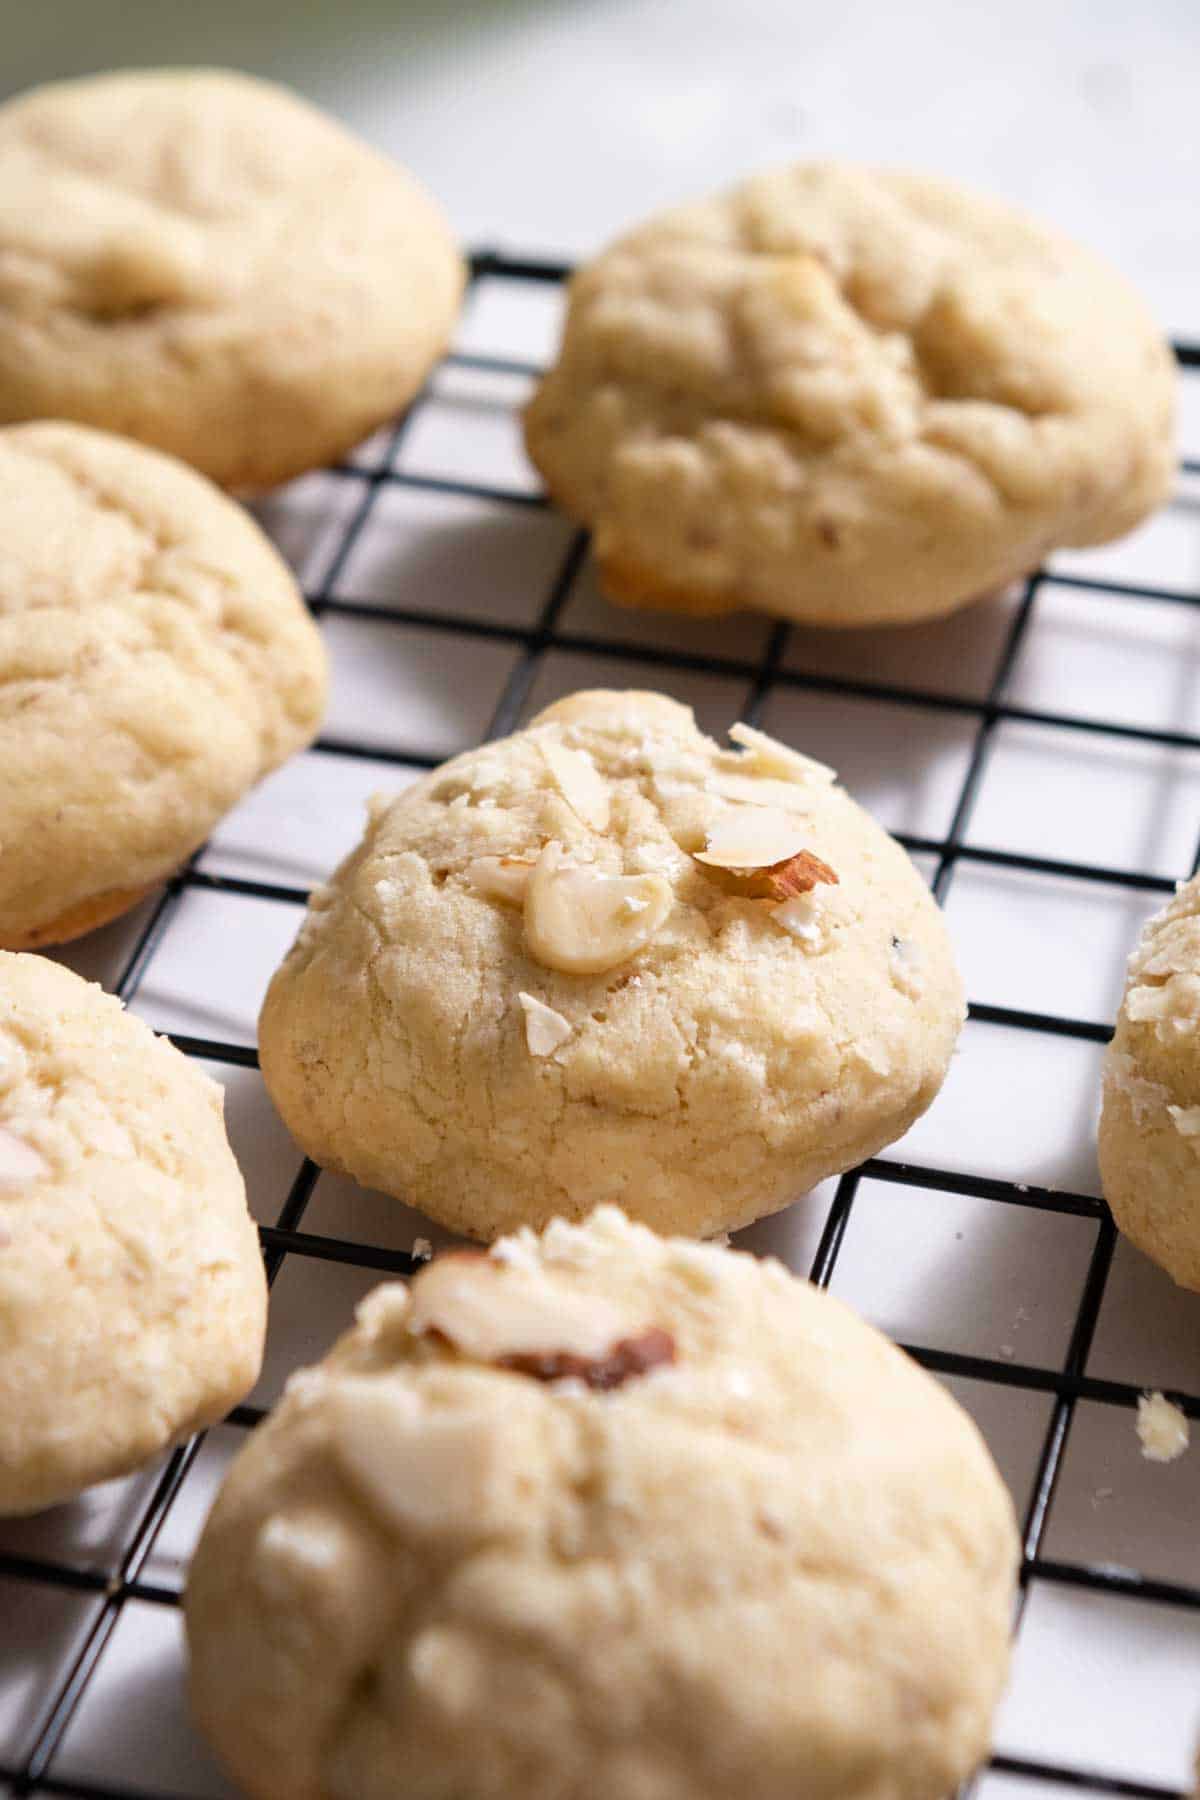 Side view of almond cookies showing puffy texture.